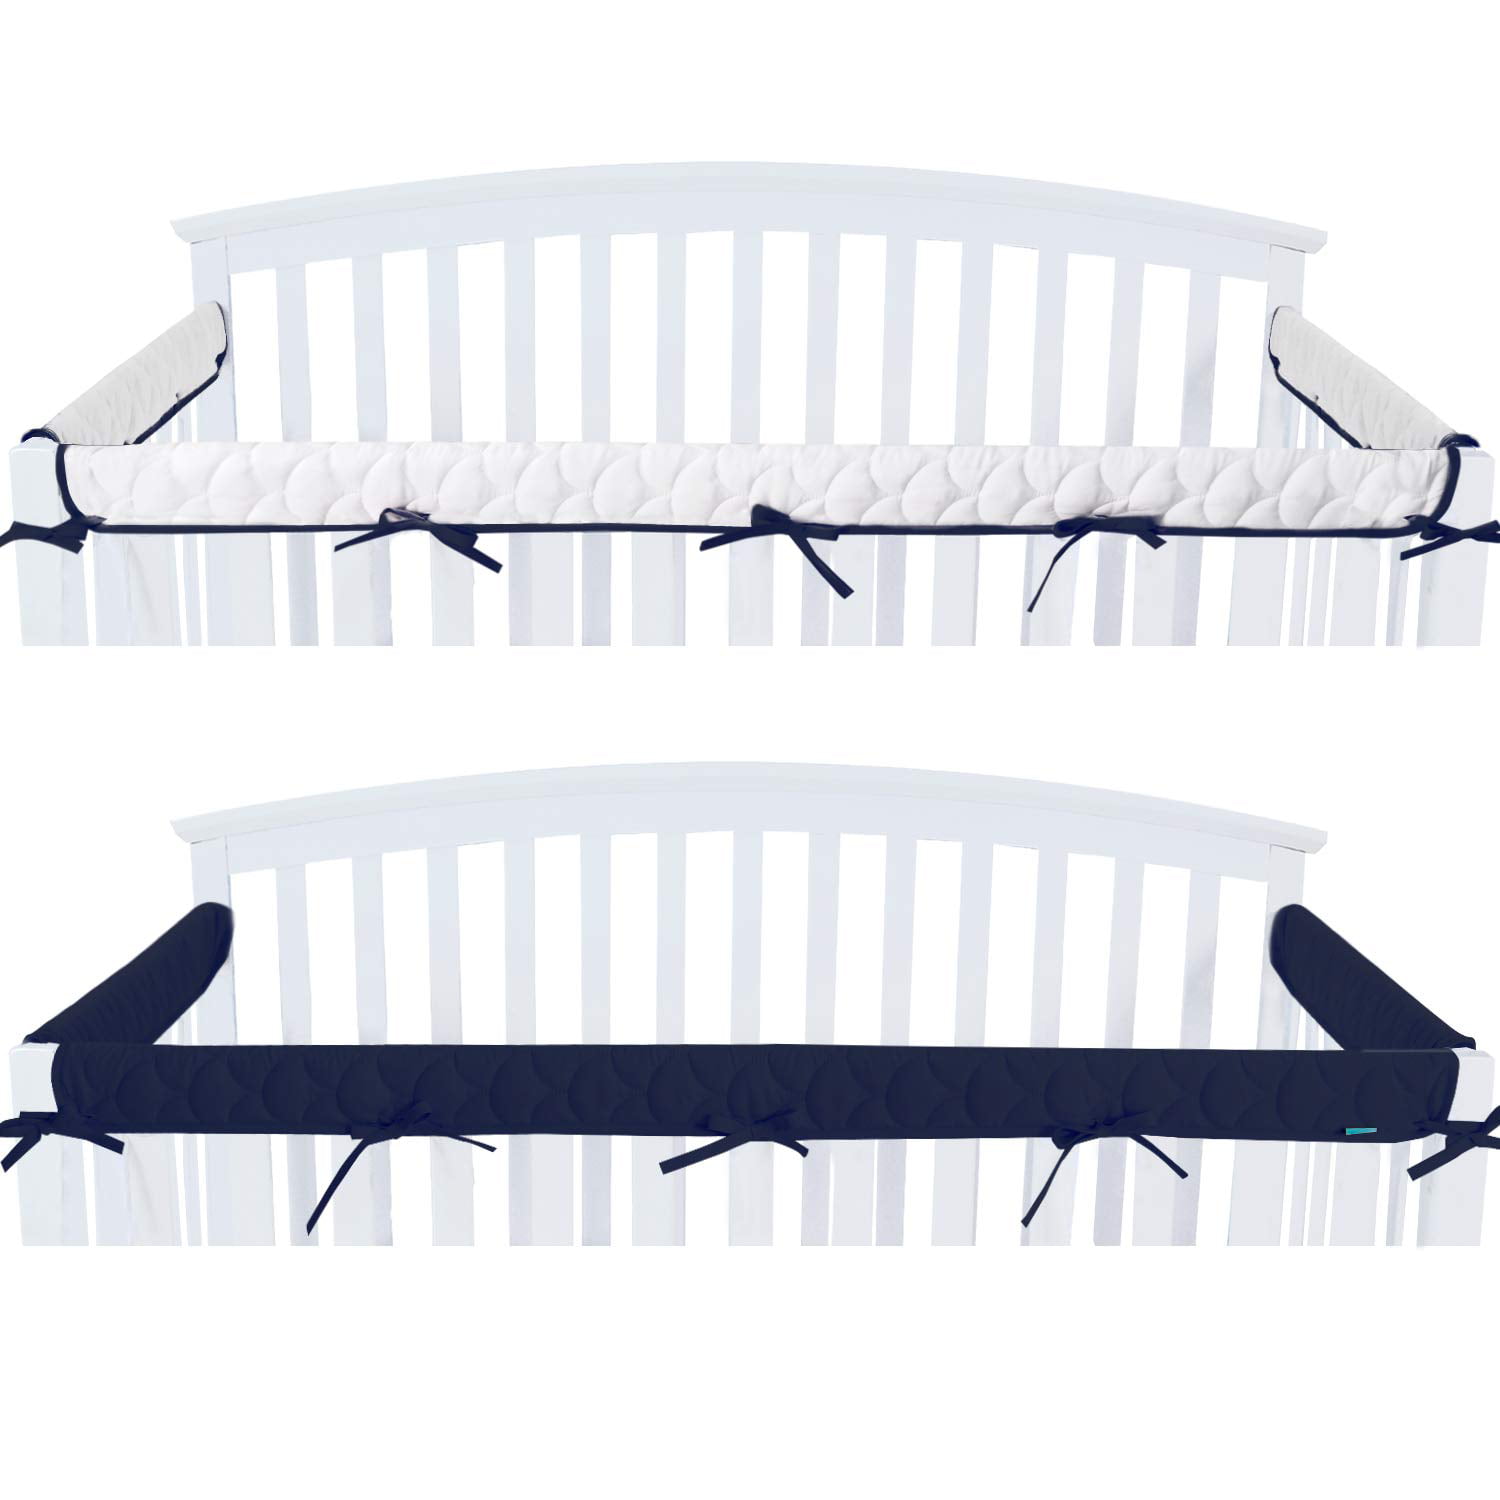 Quilted Crib Rail Cover Protector Safe Teething Guard Wrap for Standard Crib Rails, 3 Piece